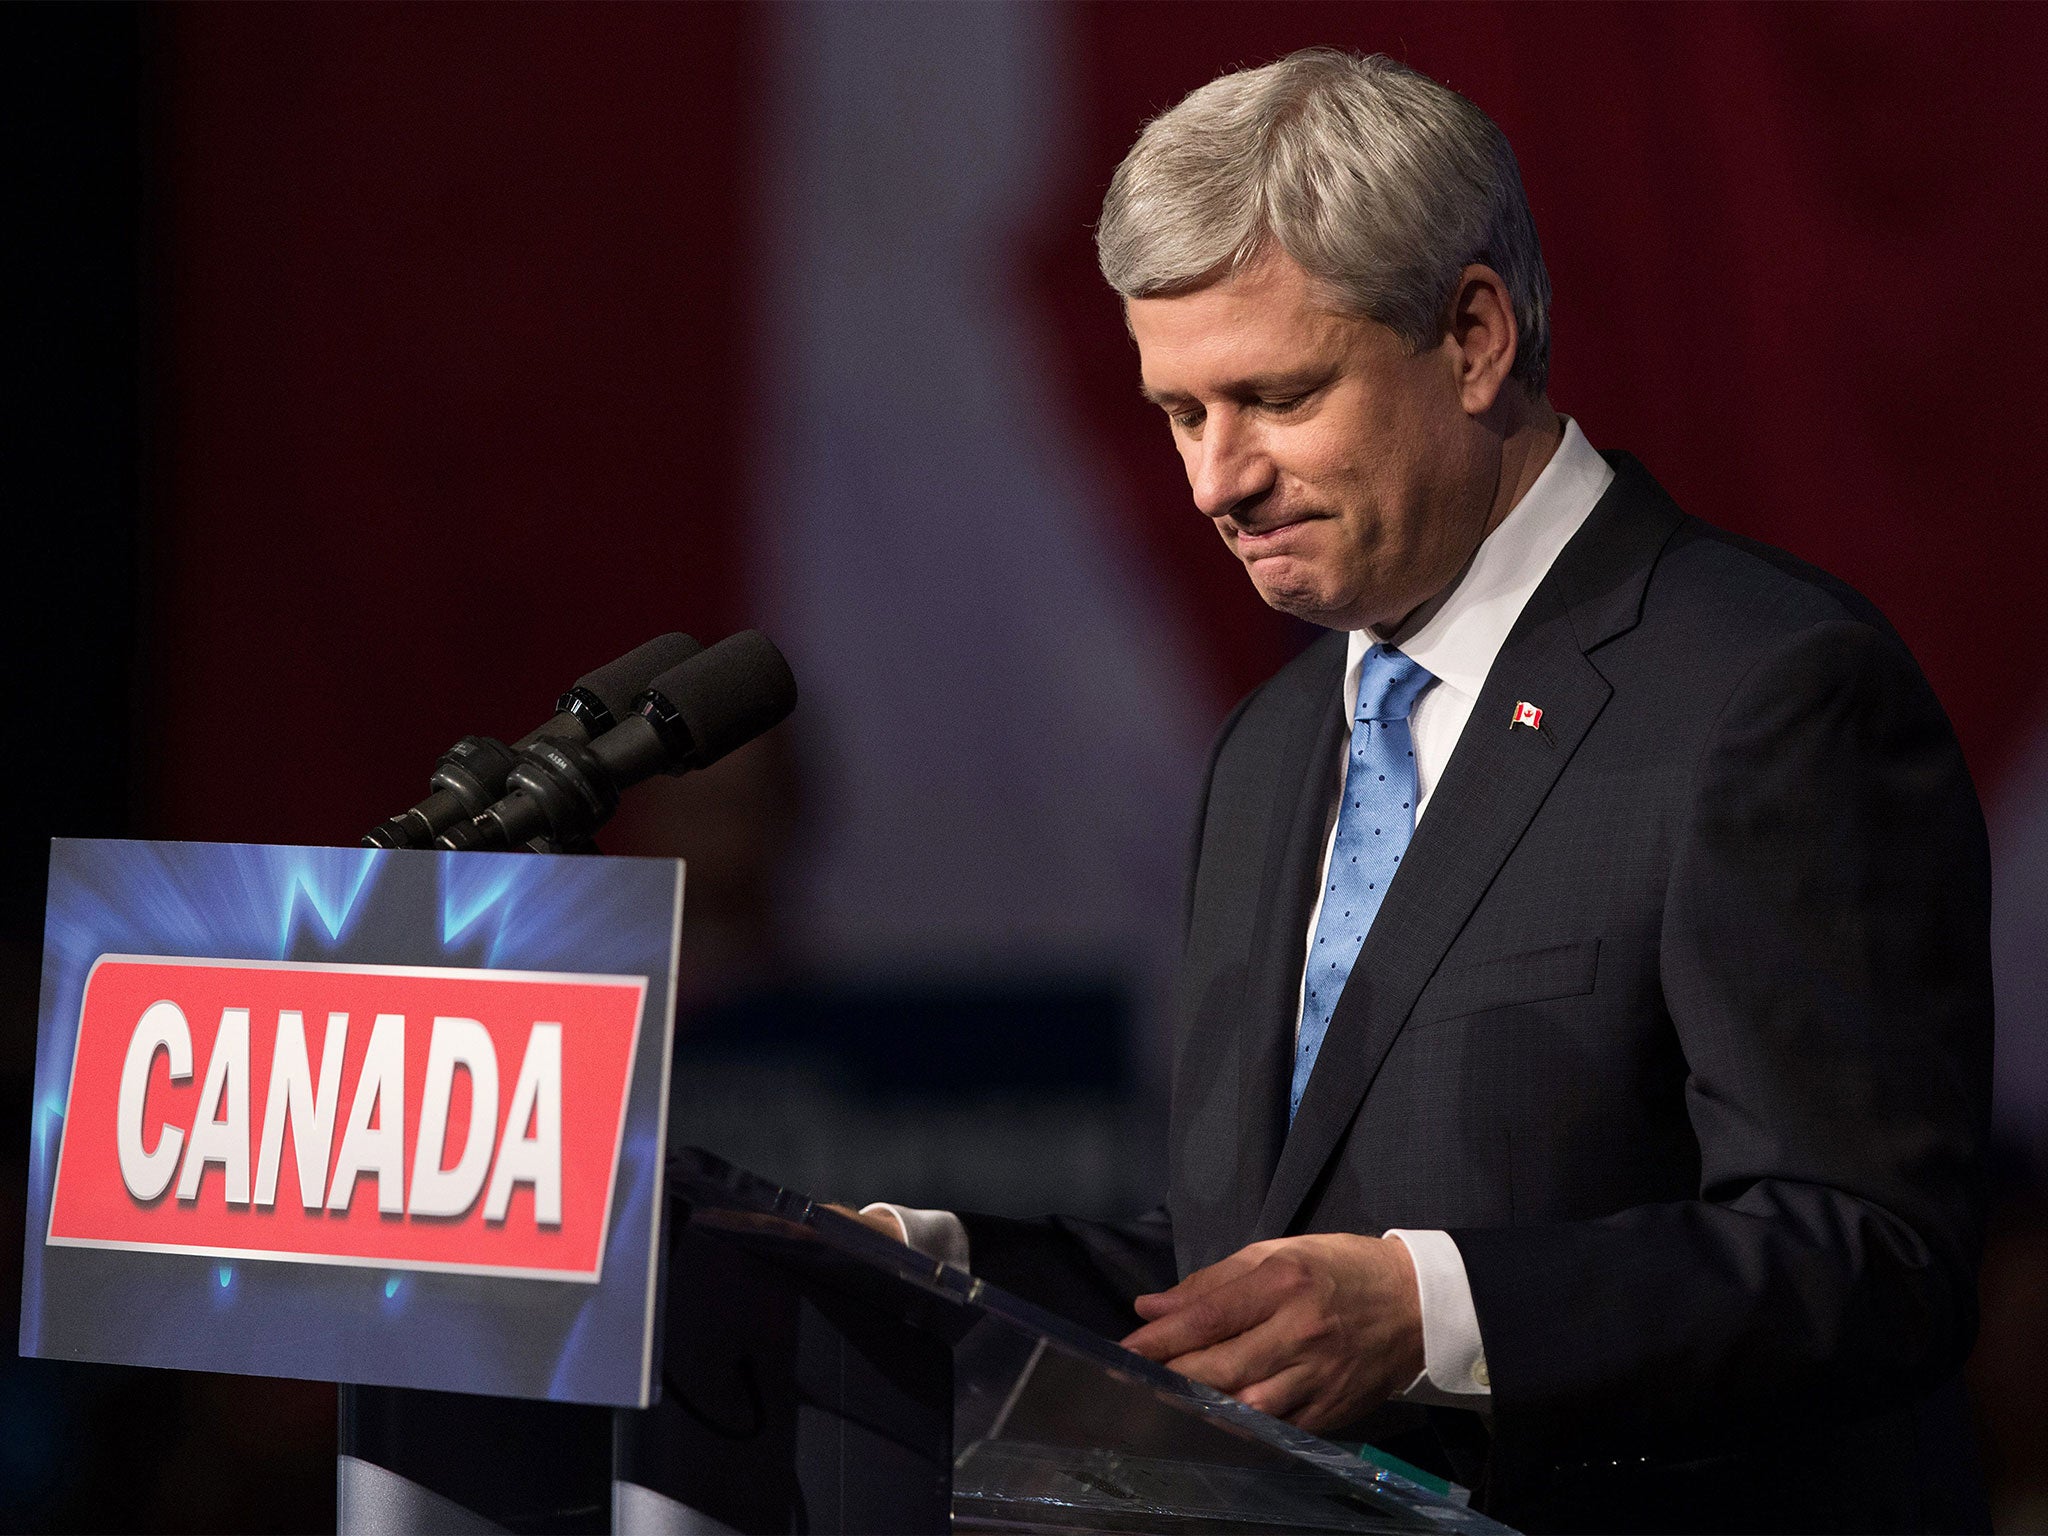 Stephen Harper addresses supporters after his defeat to Trudeau